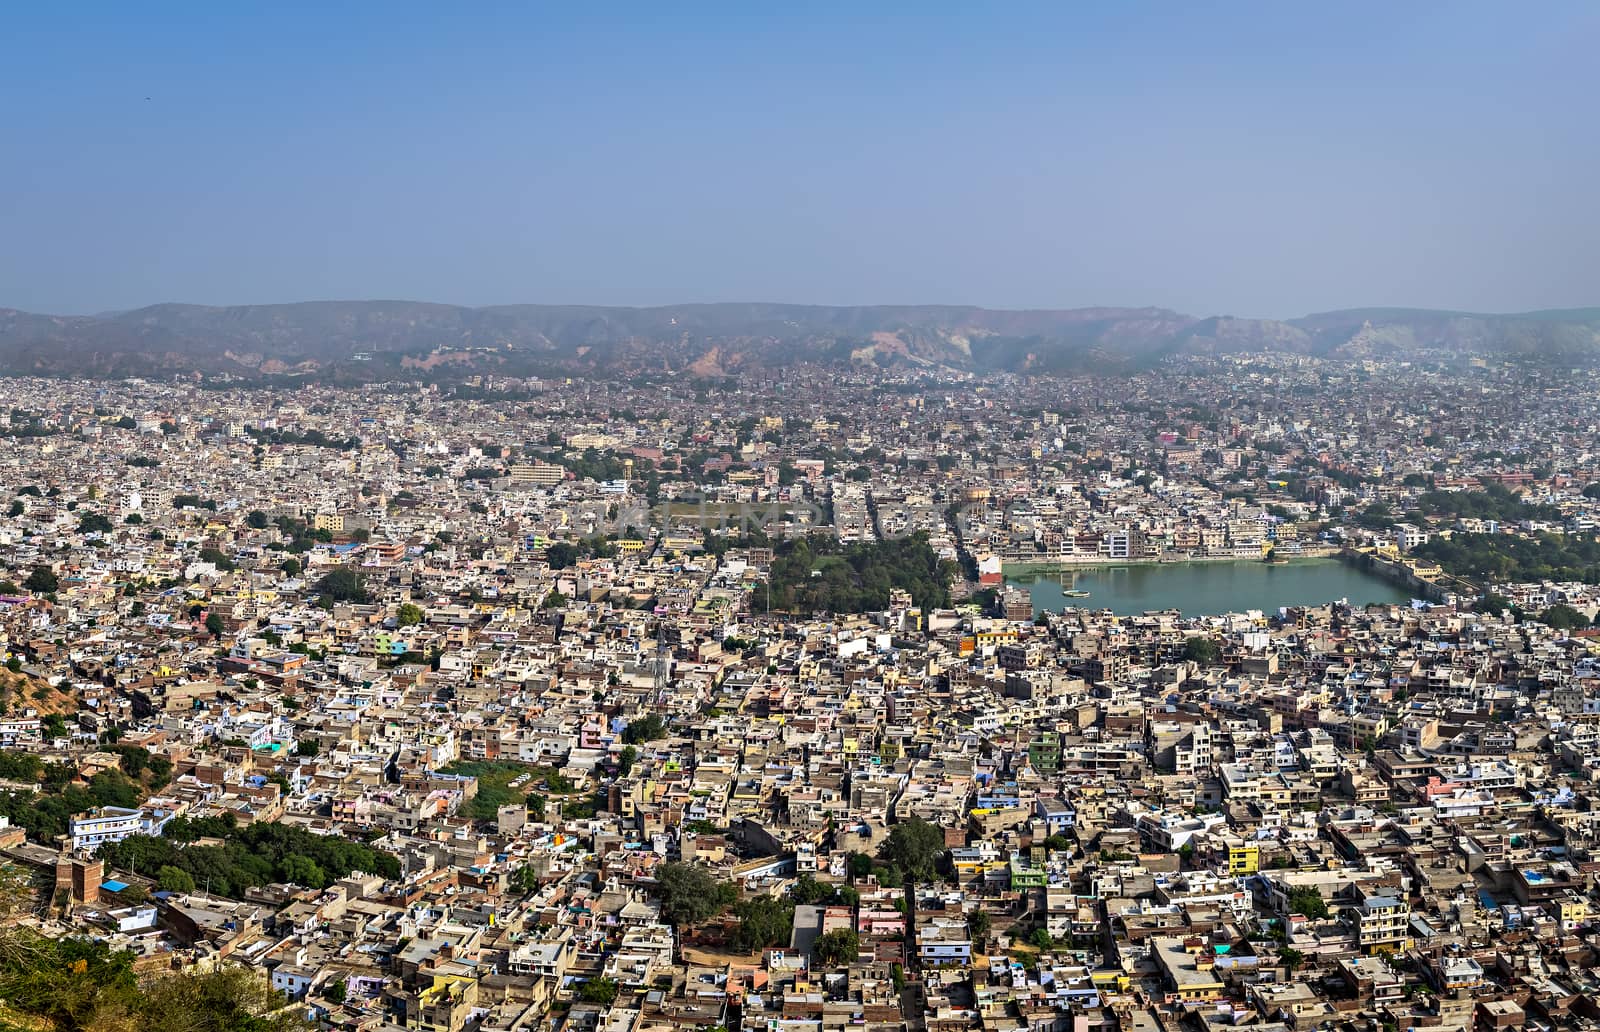 Ariel view of densely crowded houses in Jaipur city in Uttar Pradesh, India. by lalam